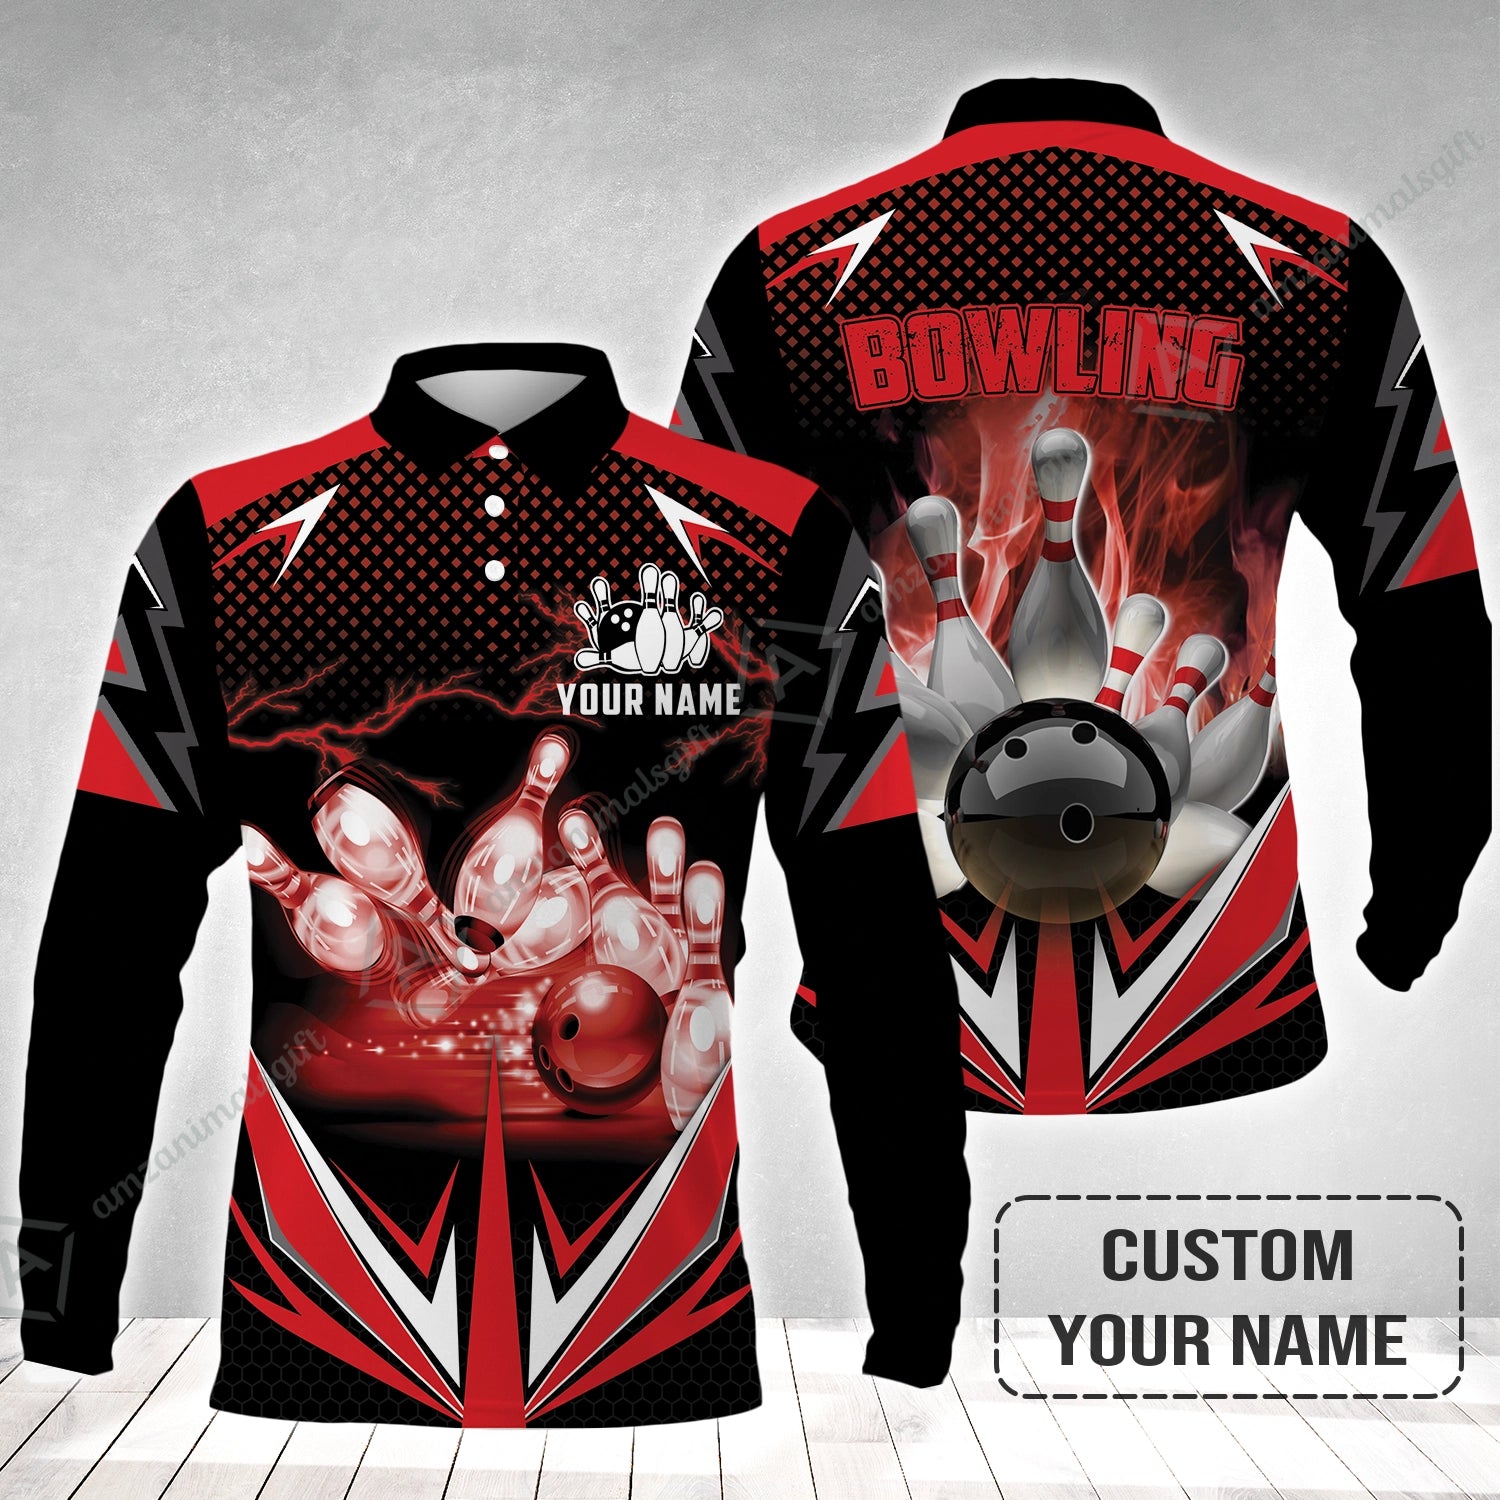 Customized Bowling Red Fire Long Polo Shirt For Bowling Players, Bowling Team Uniform Shirts, Gift For Men, Bowling Lovers, Bowlers